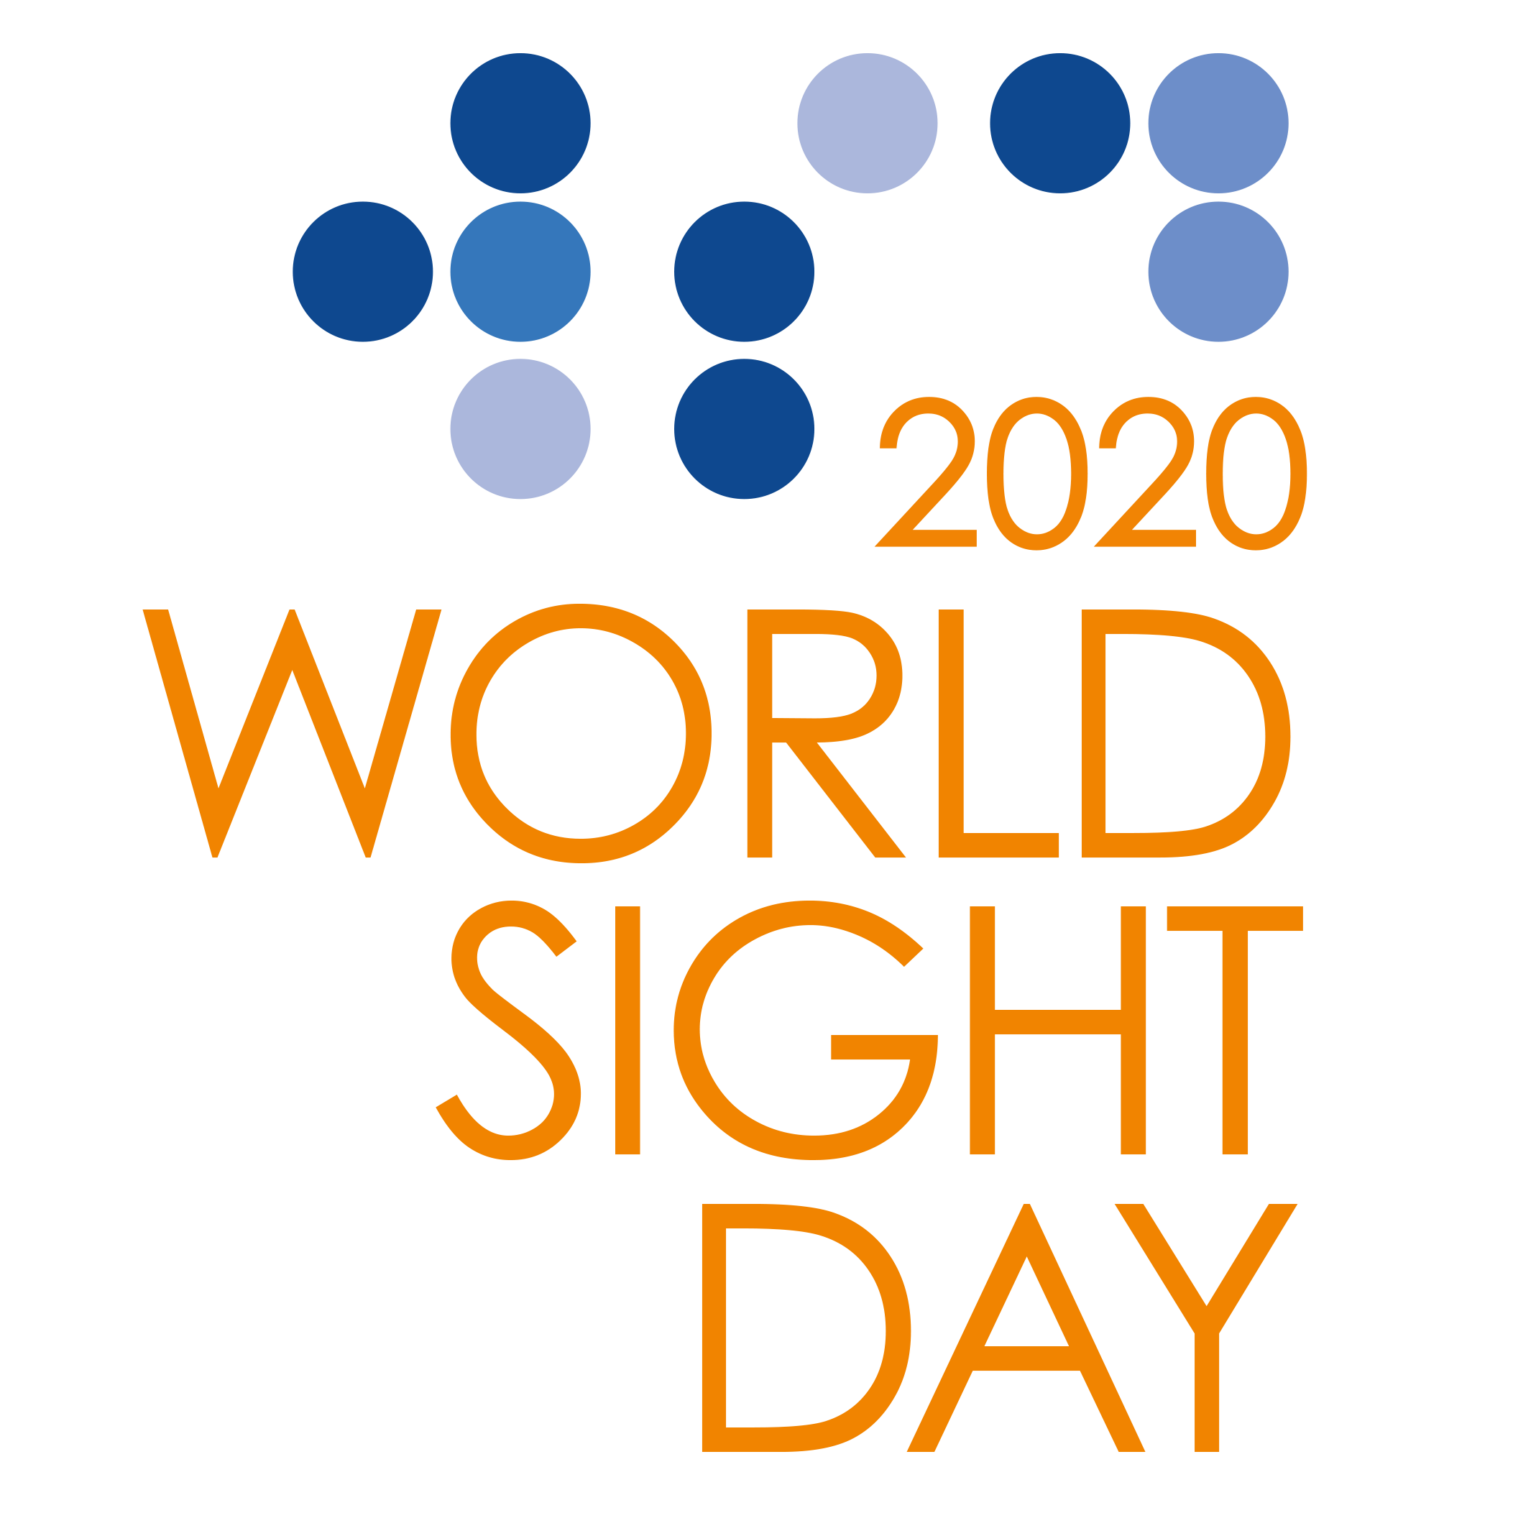 What is World Sight Day? The International Agency for the Prevention